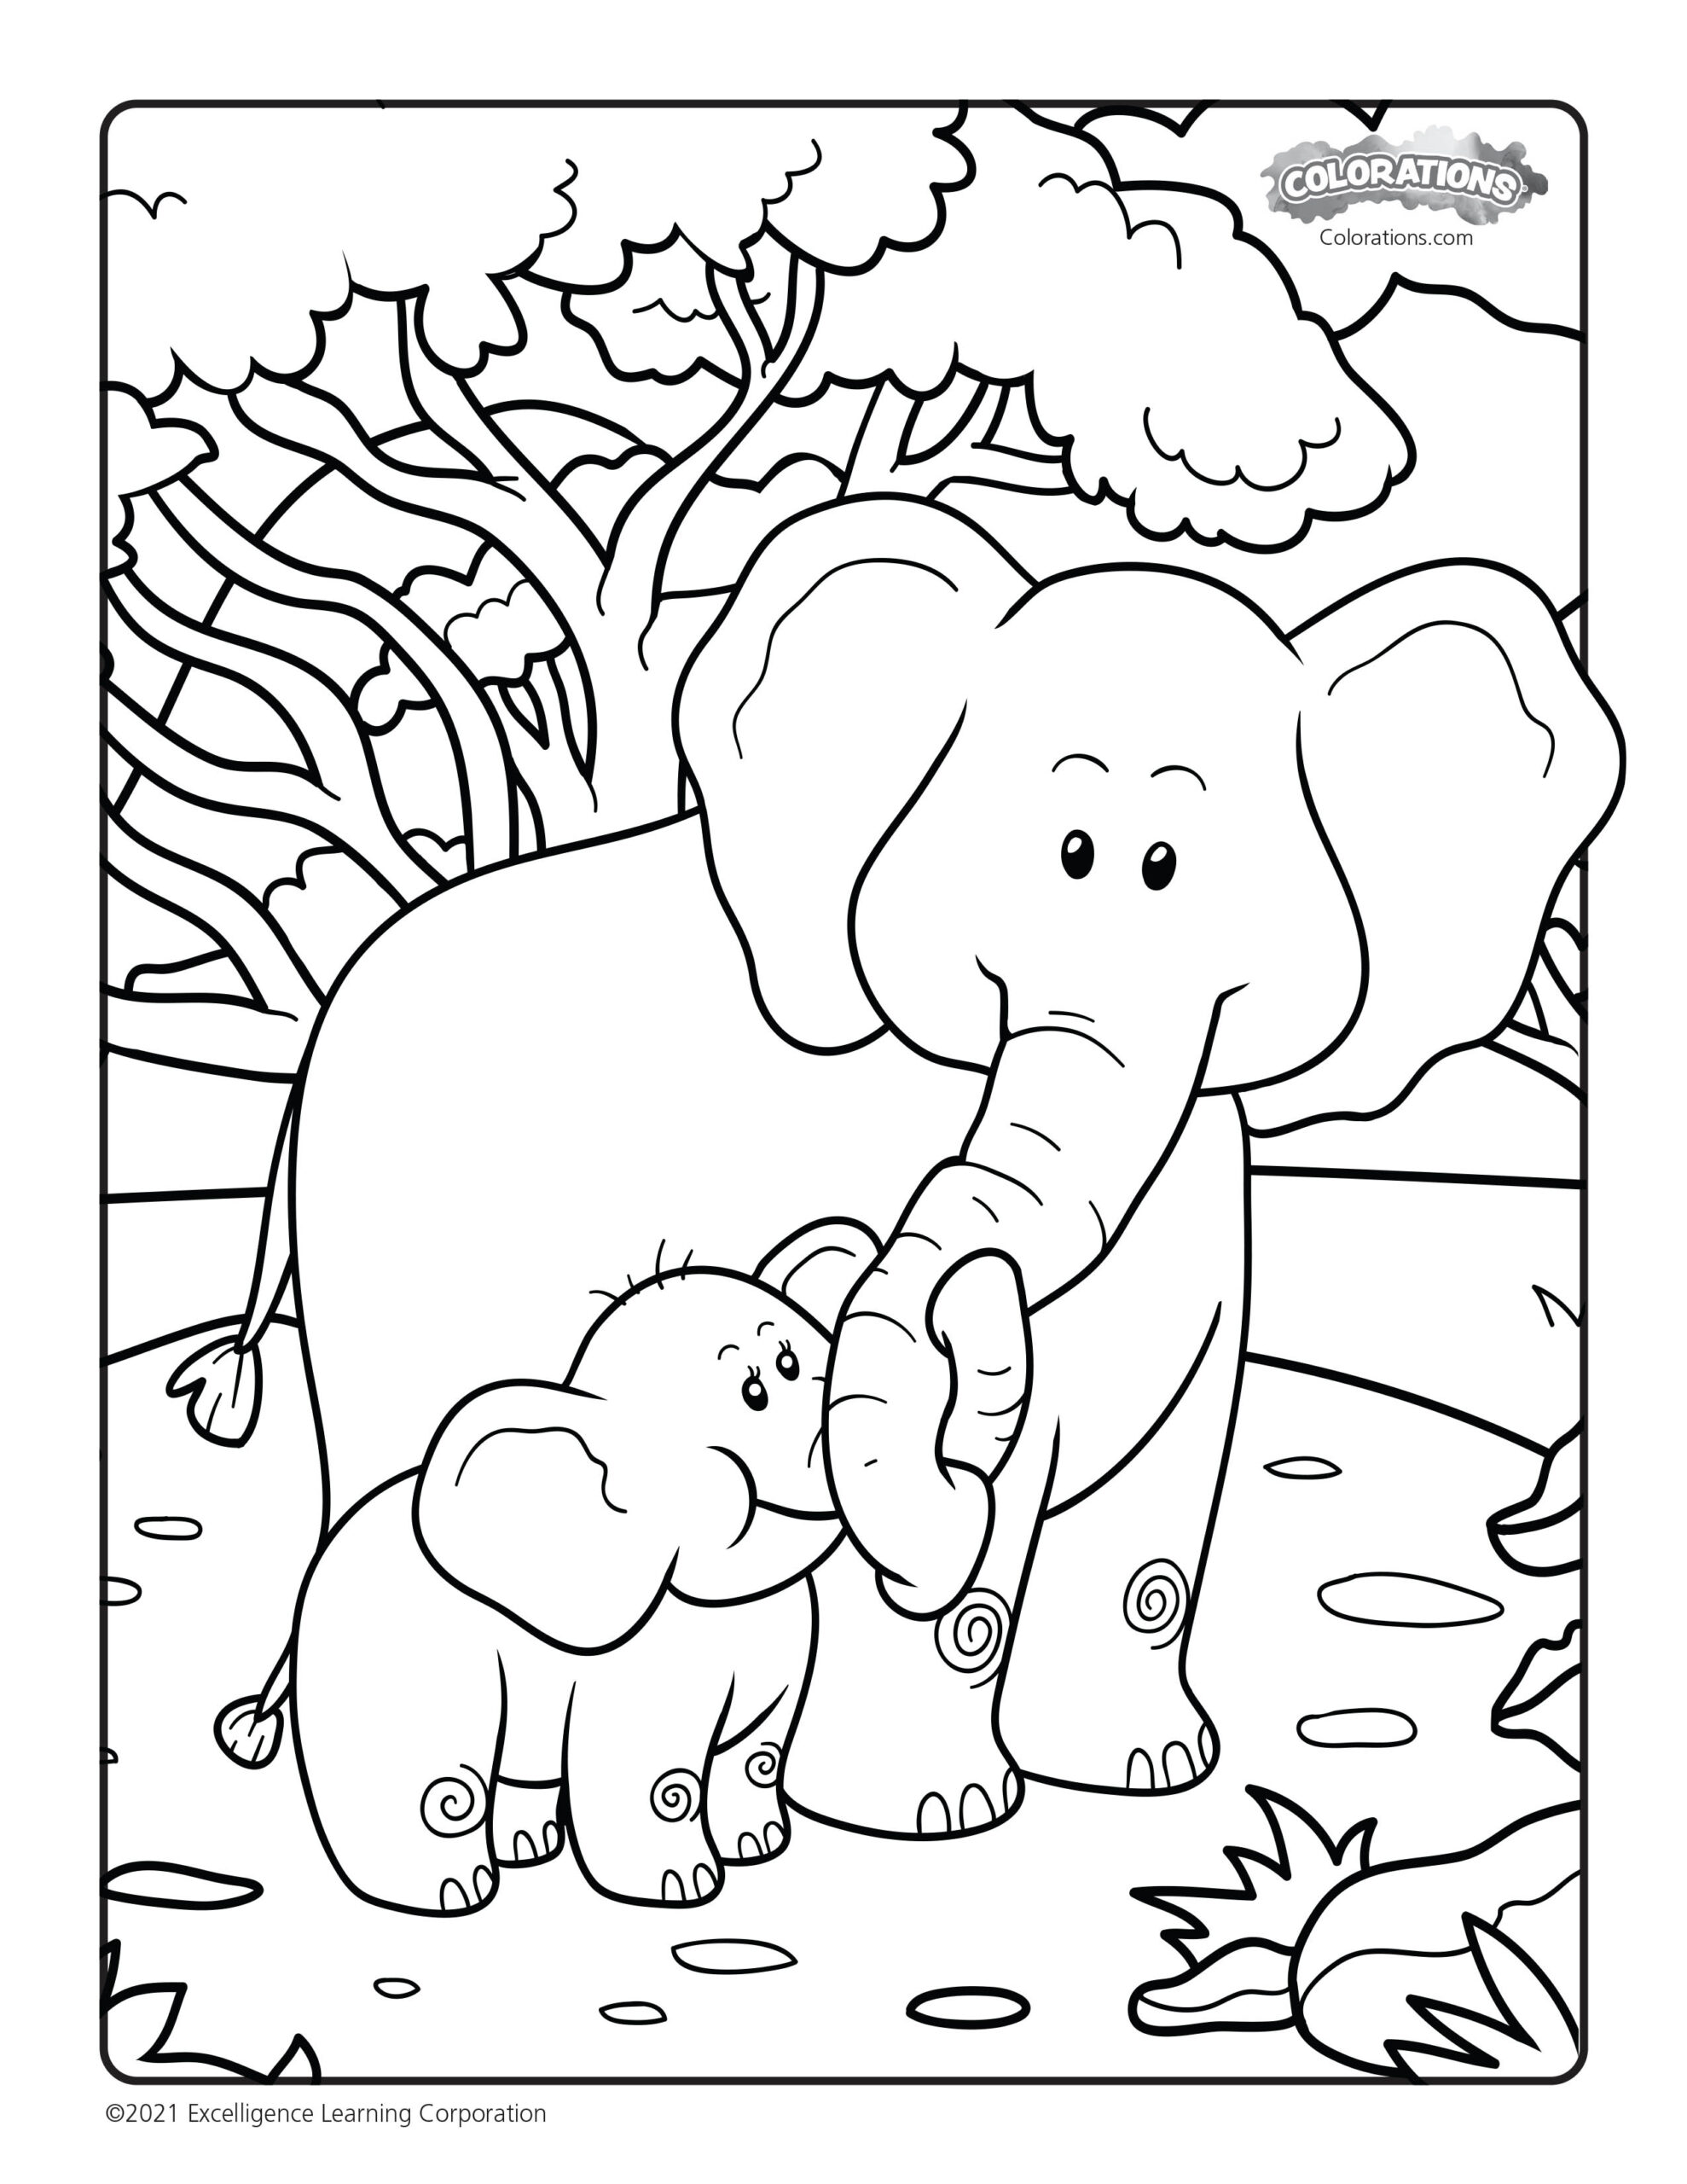 Colorations Coloring Pages